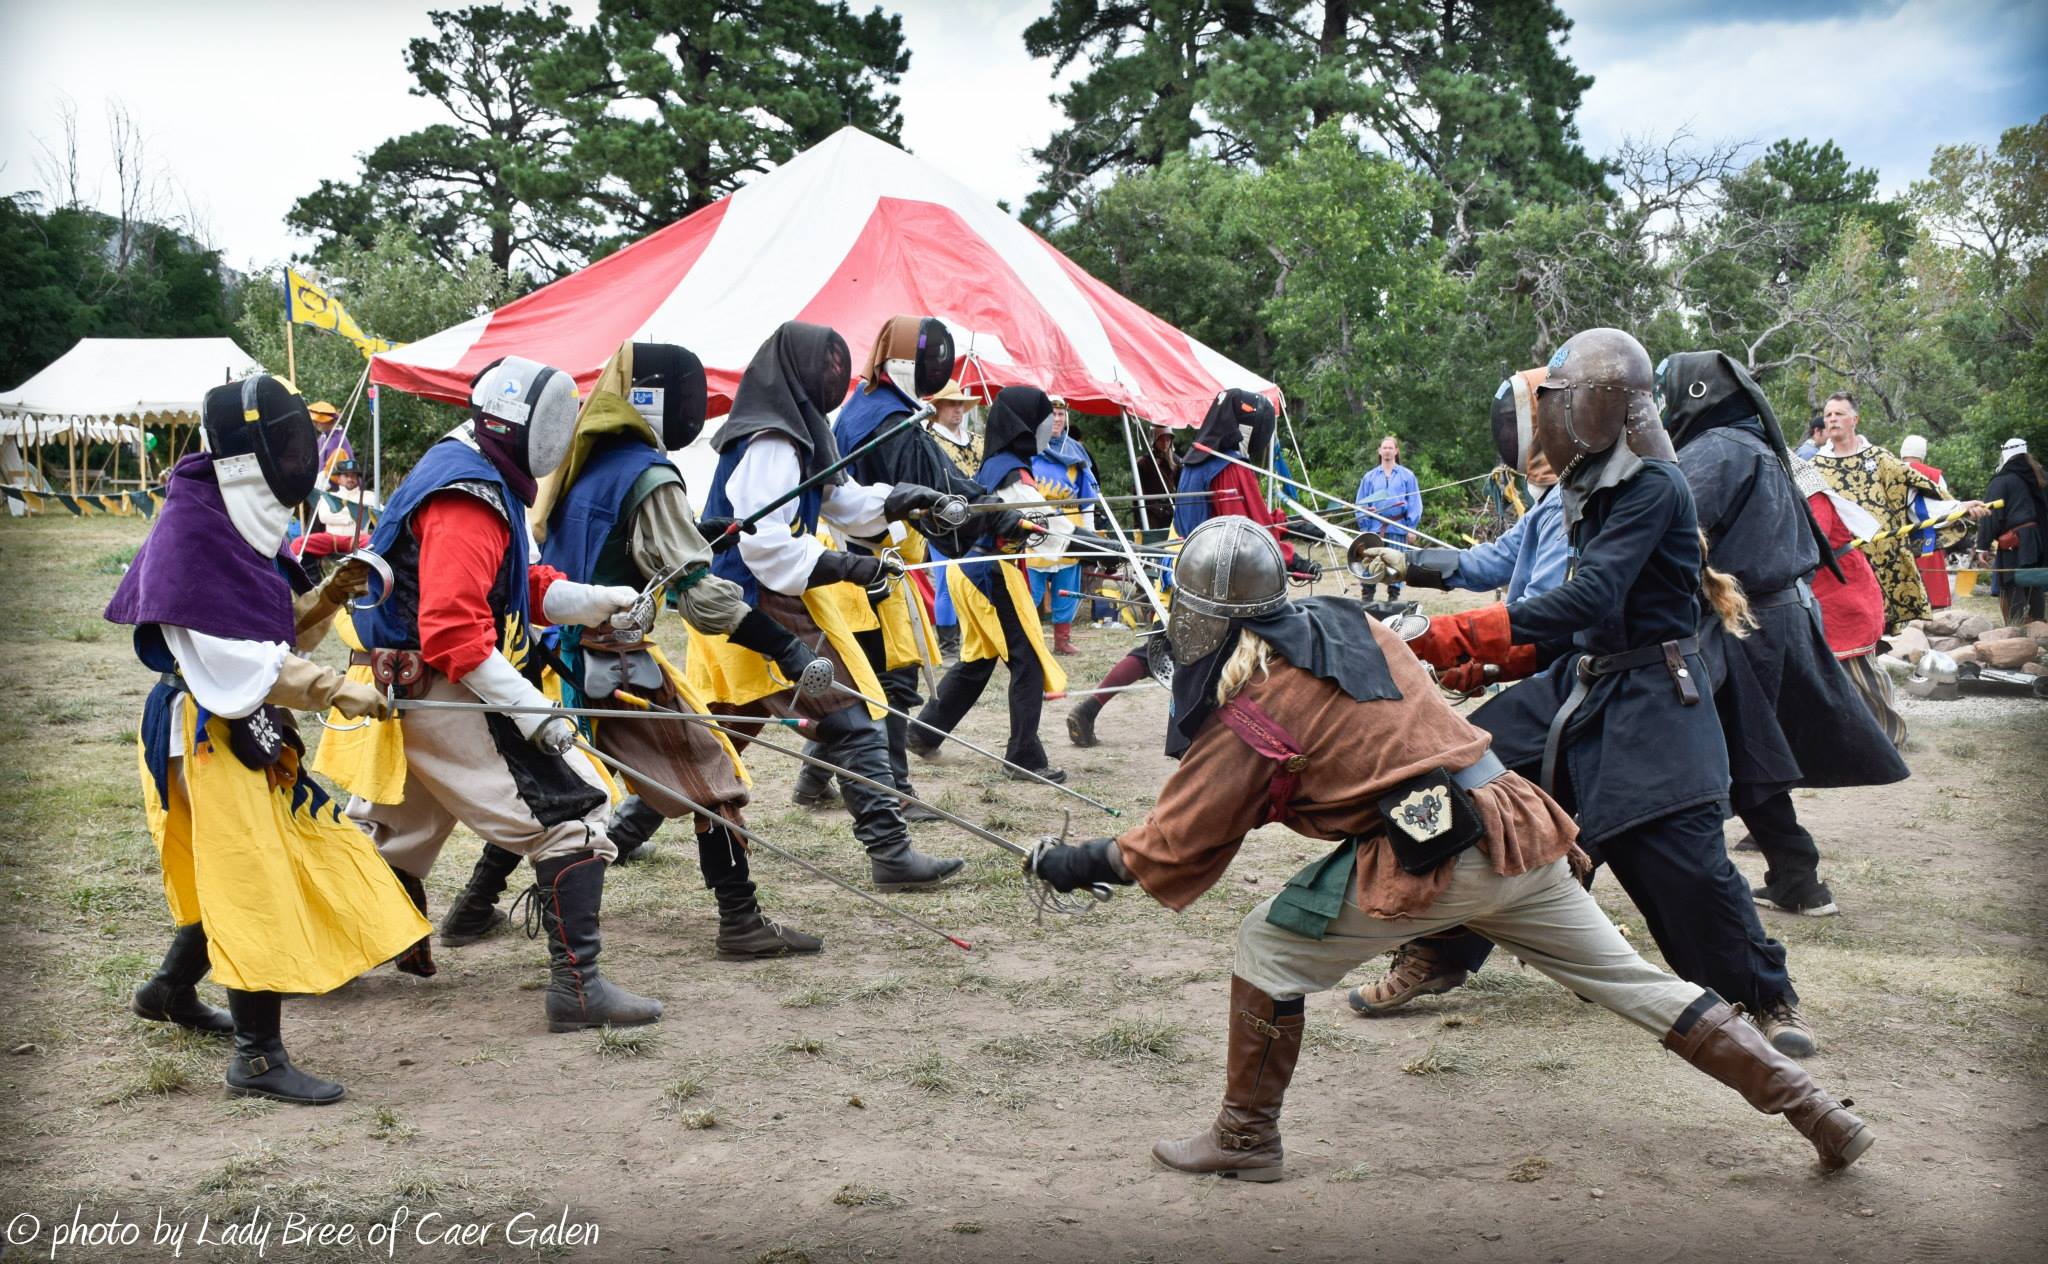 A group of fencers fighting